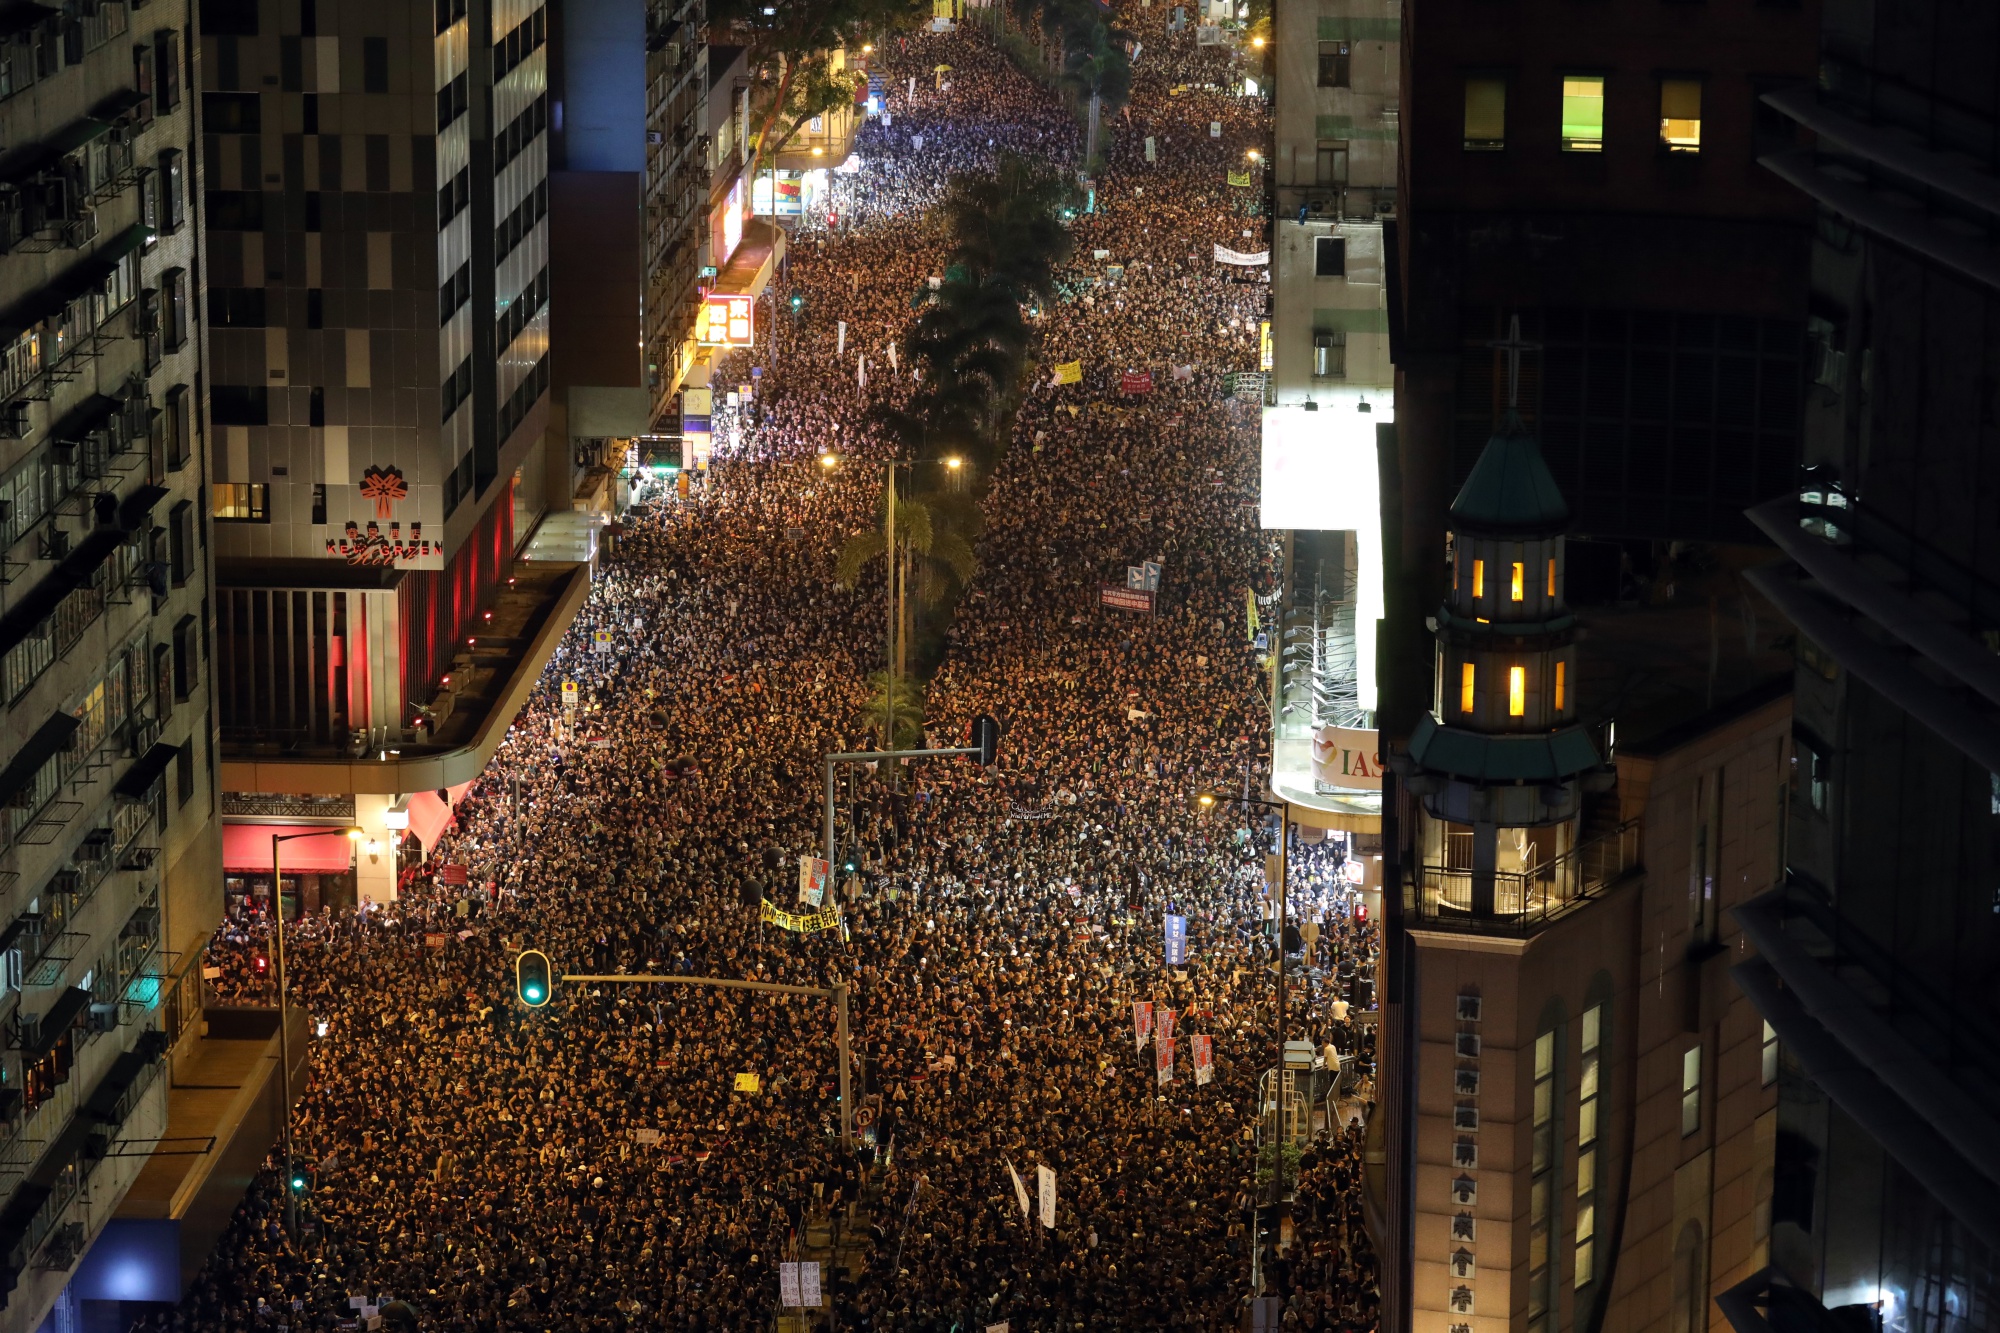 Protesters march at night during a rally in Hong Kong, June 2019.